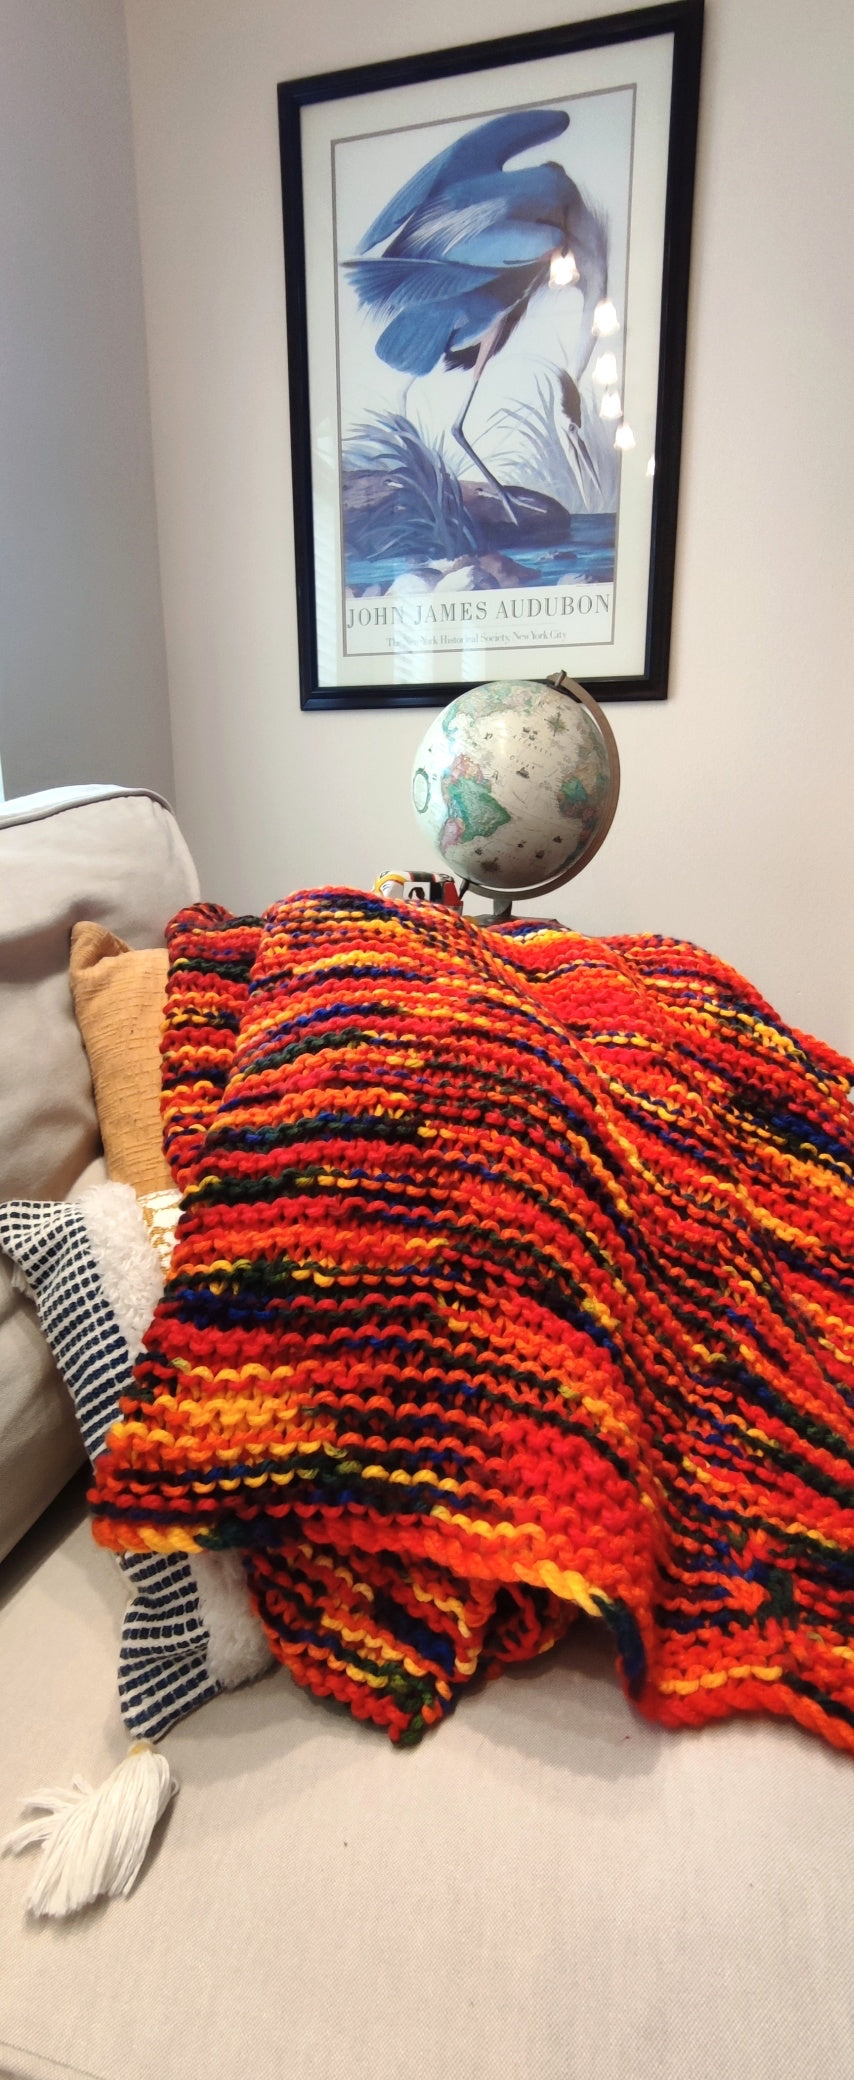 The blanket is primarily red with yellow, orange, green, and blue woven in. It sits on a tan couch with a globe in the background.